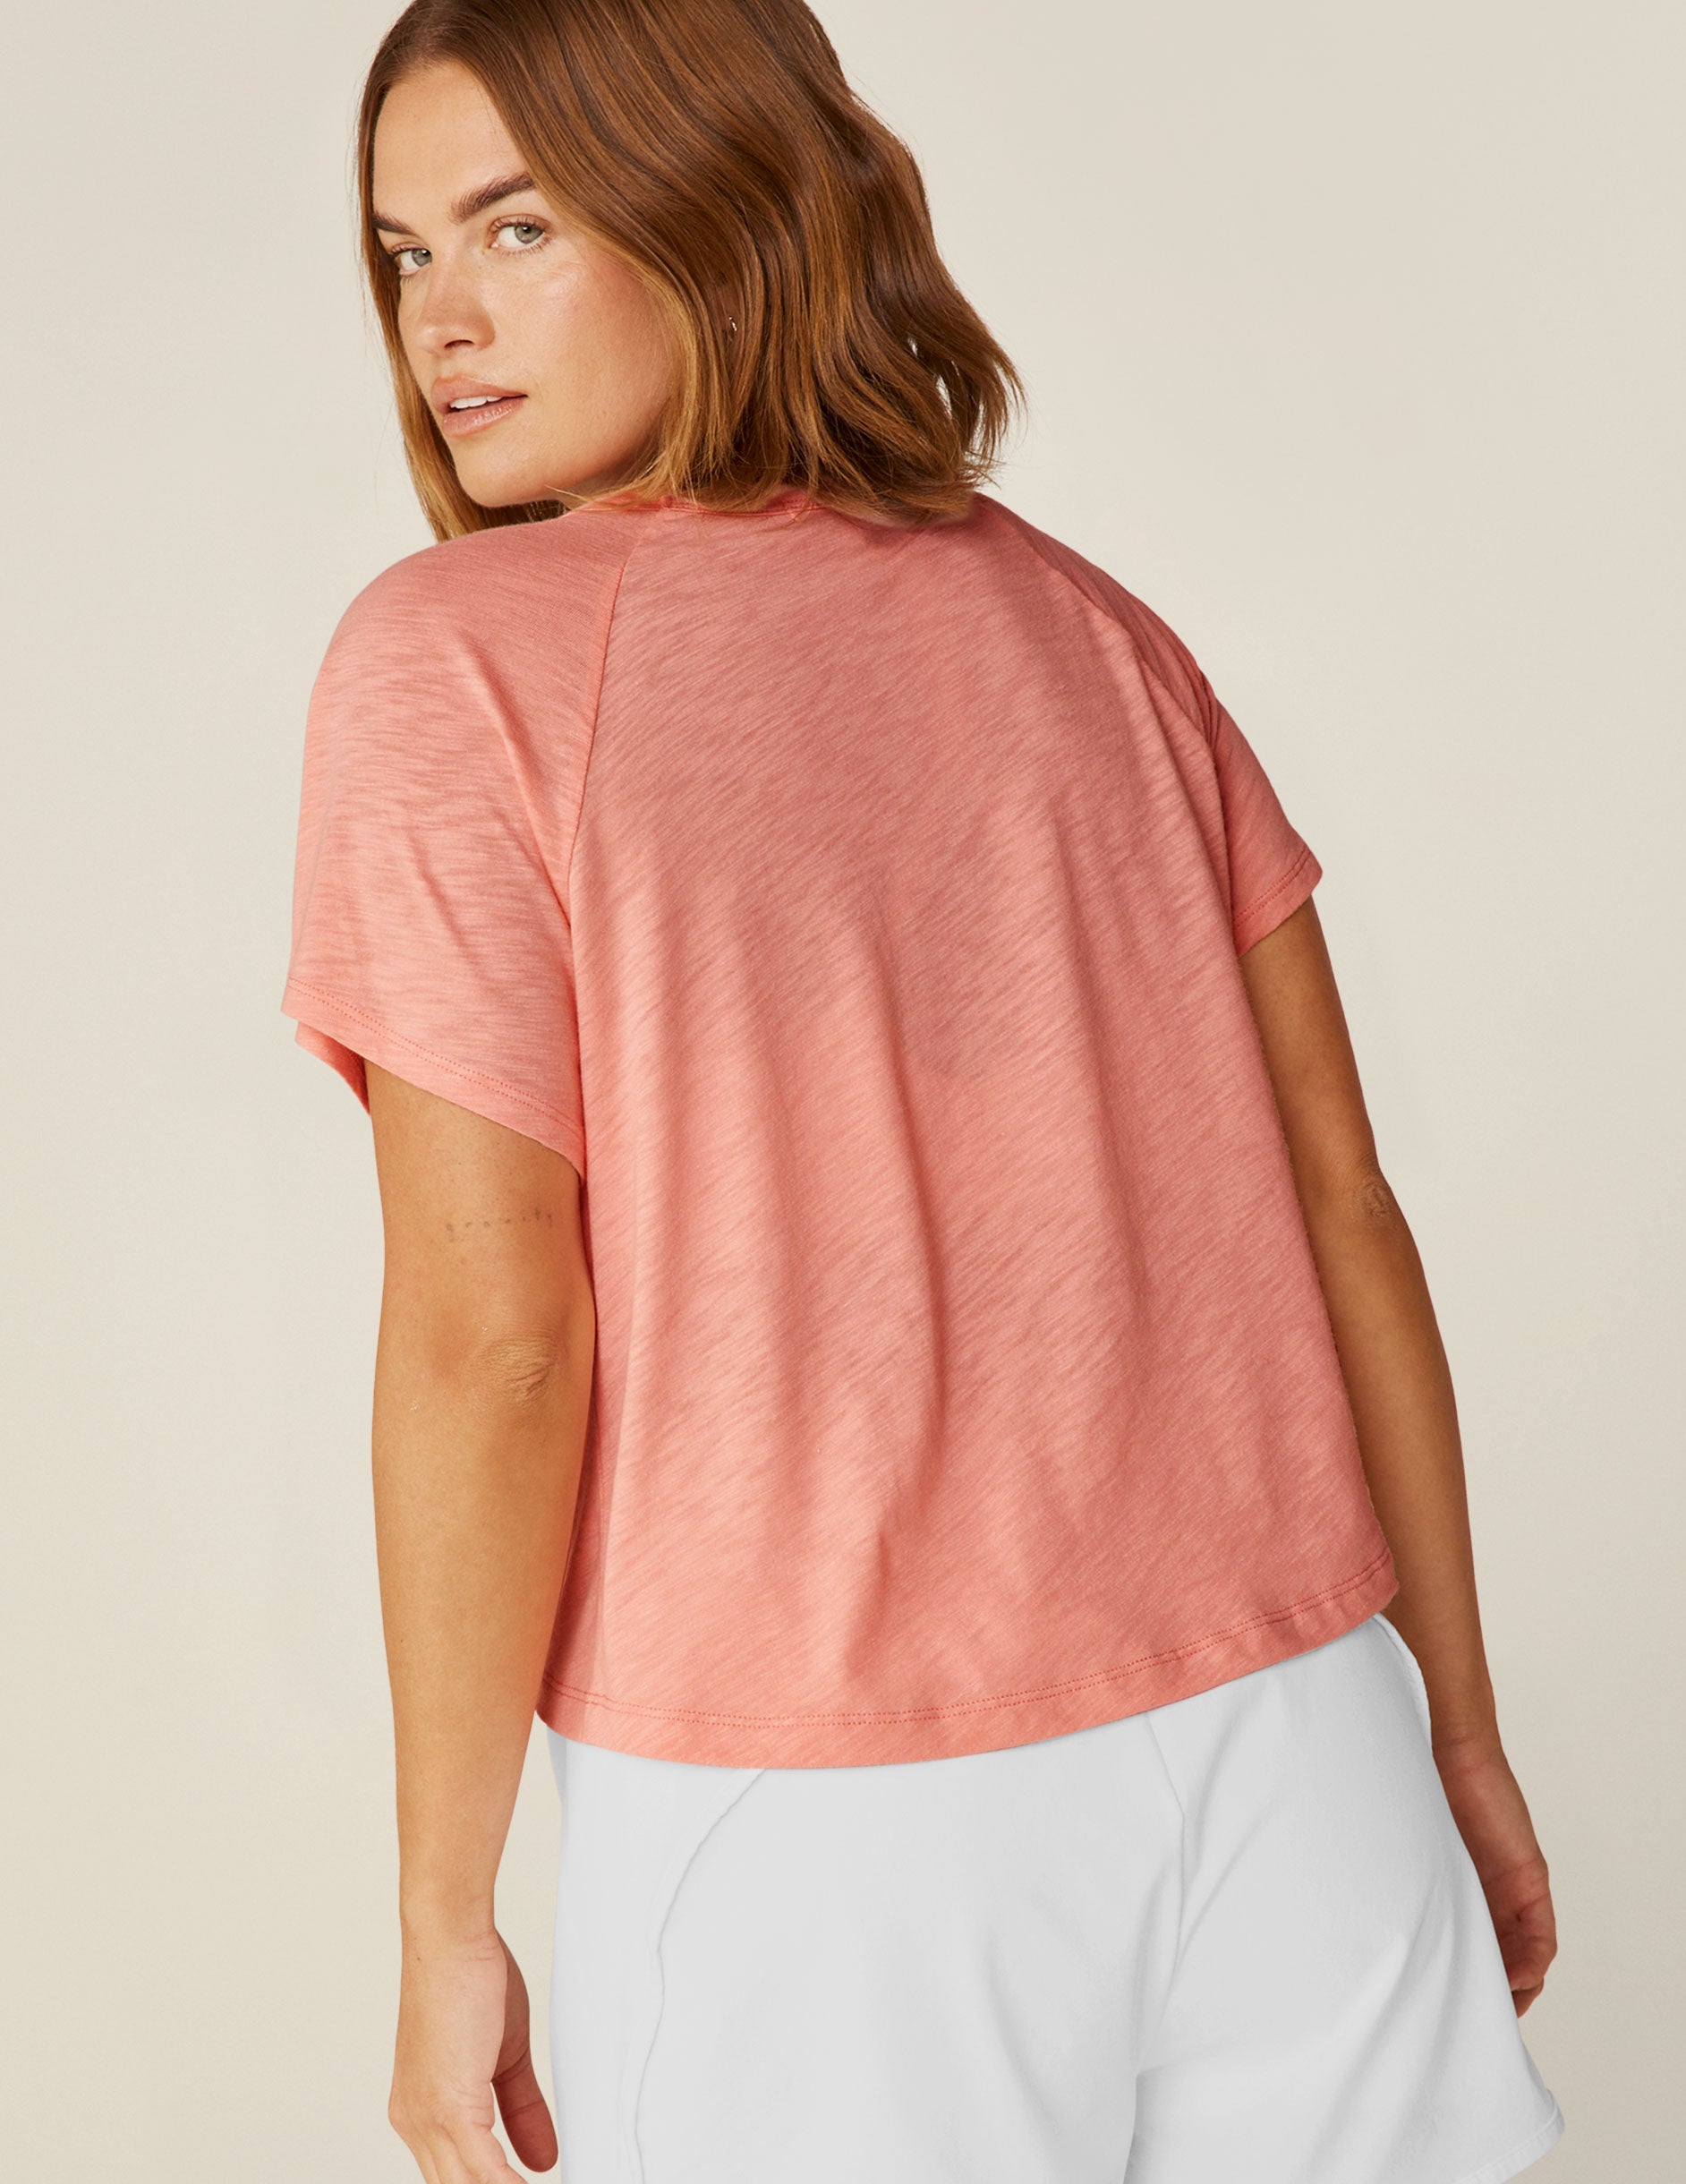 pink v-neck high-low cropped top.